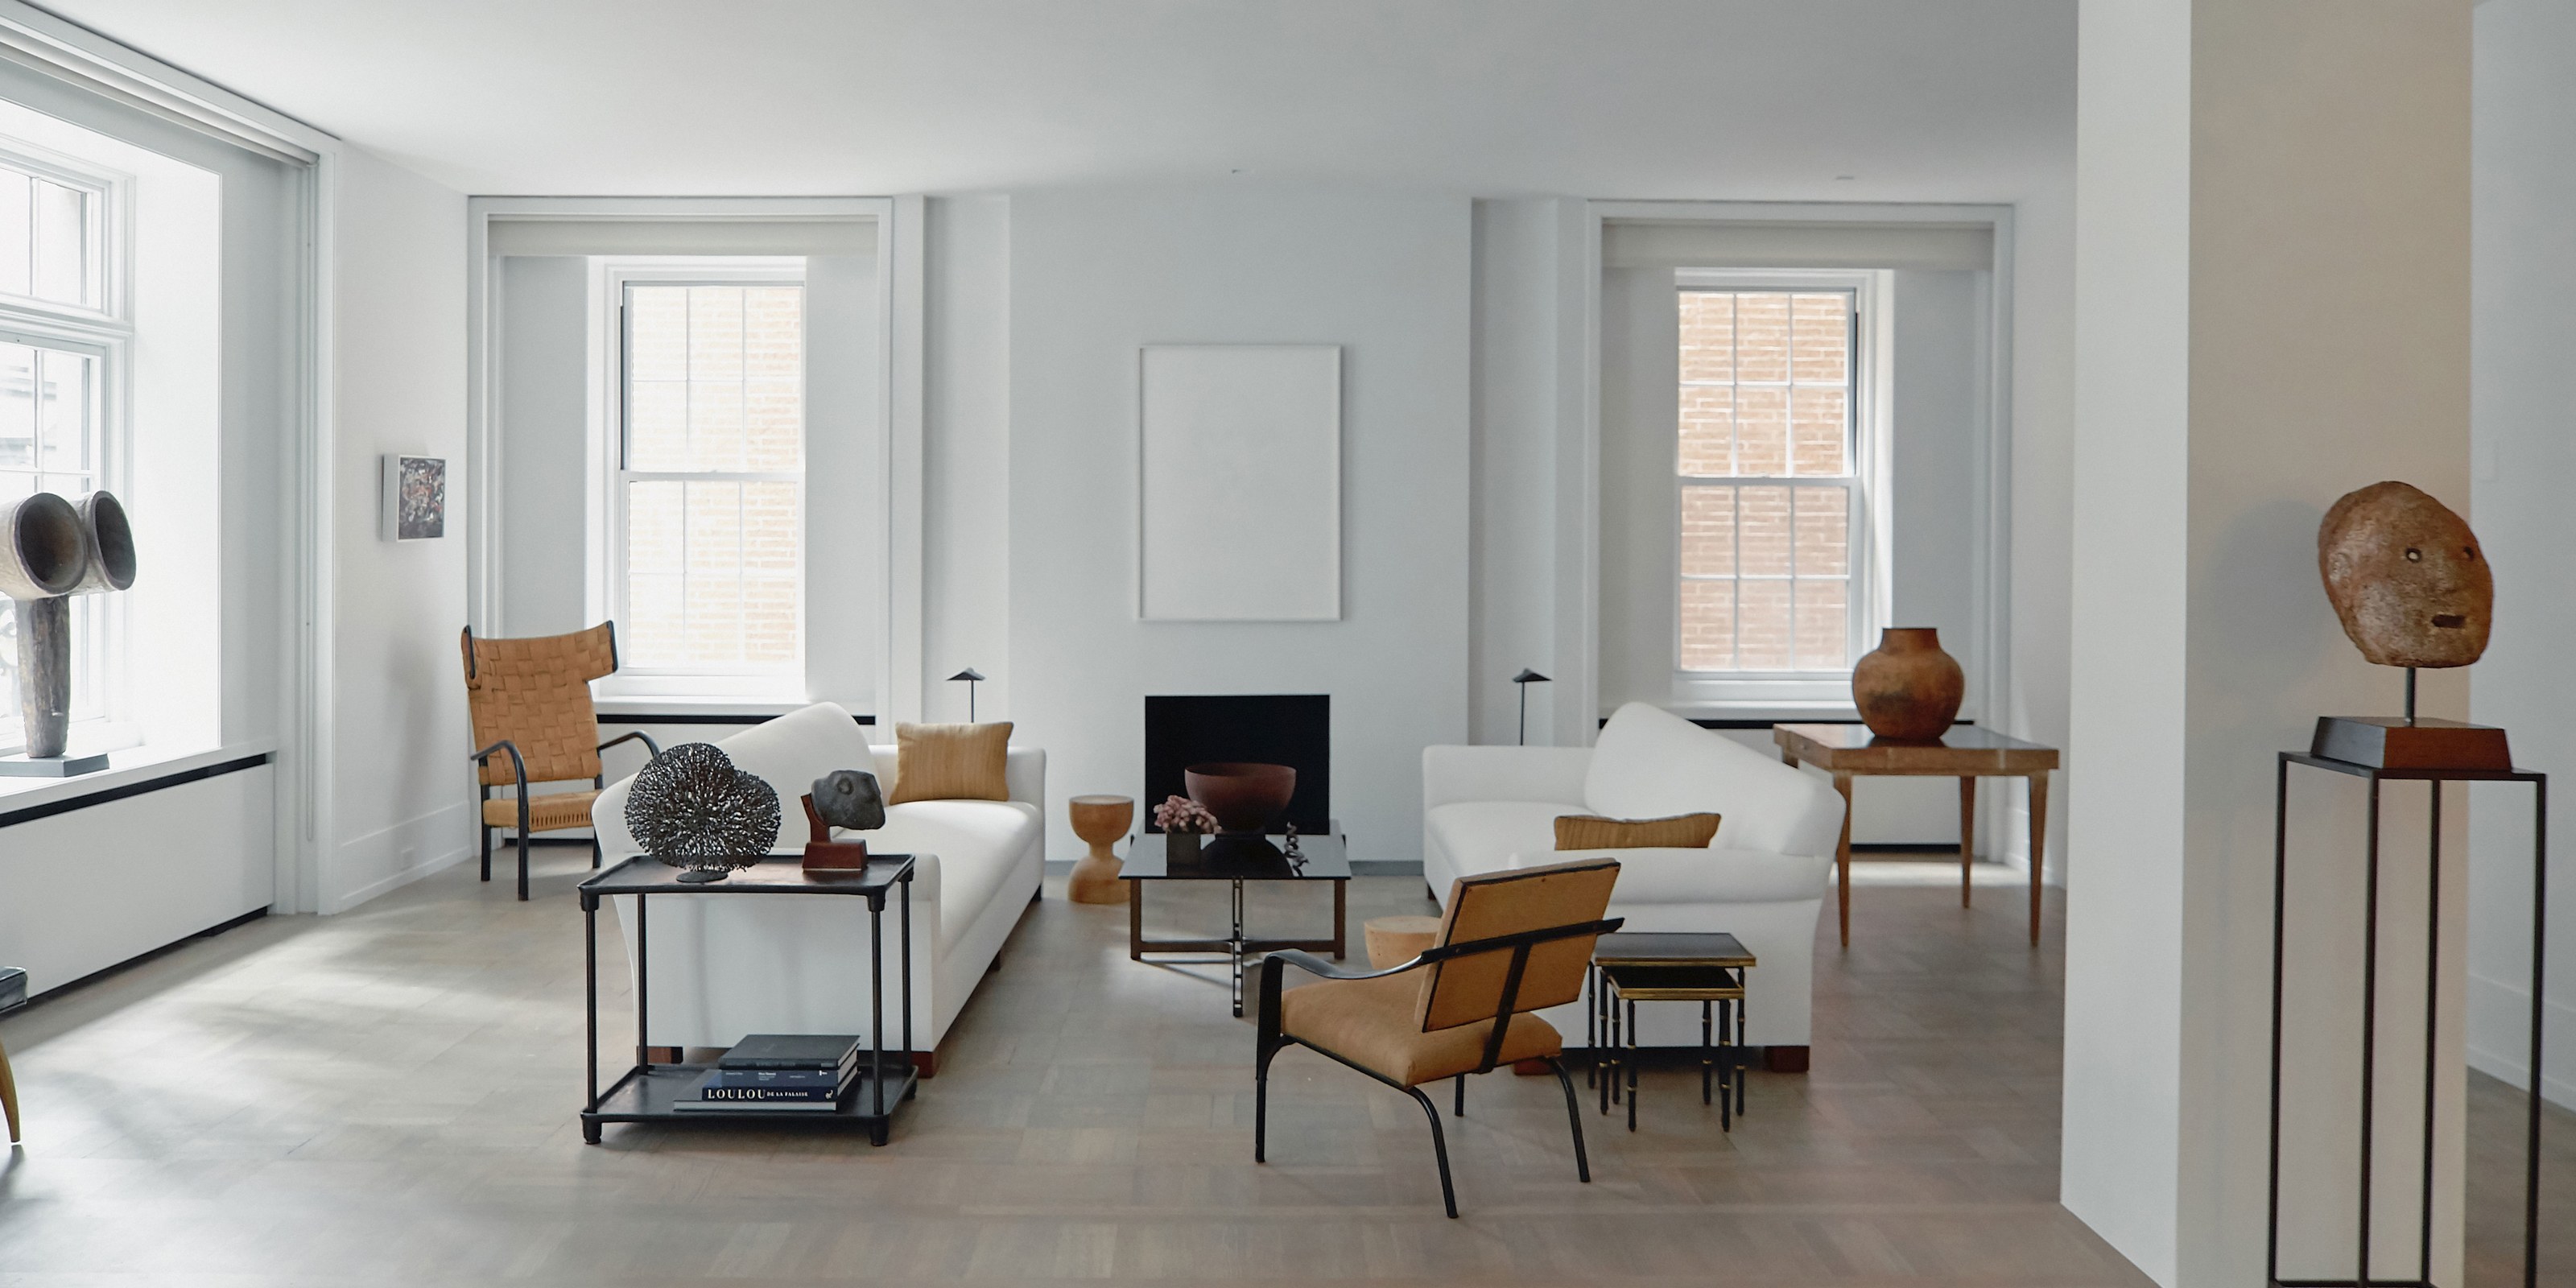 The Magical Minimalist Francisco Costa Interior Inspiration Forever Chic by Meg